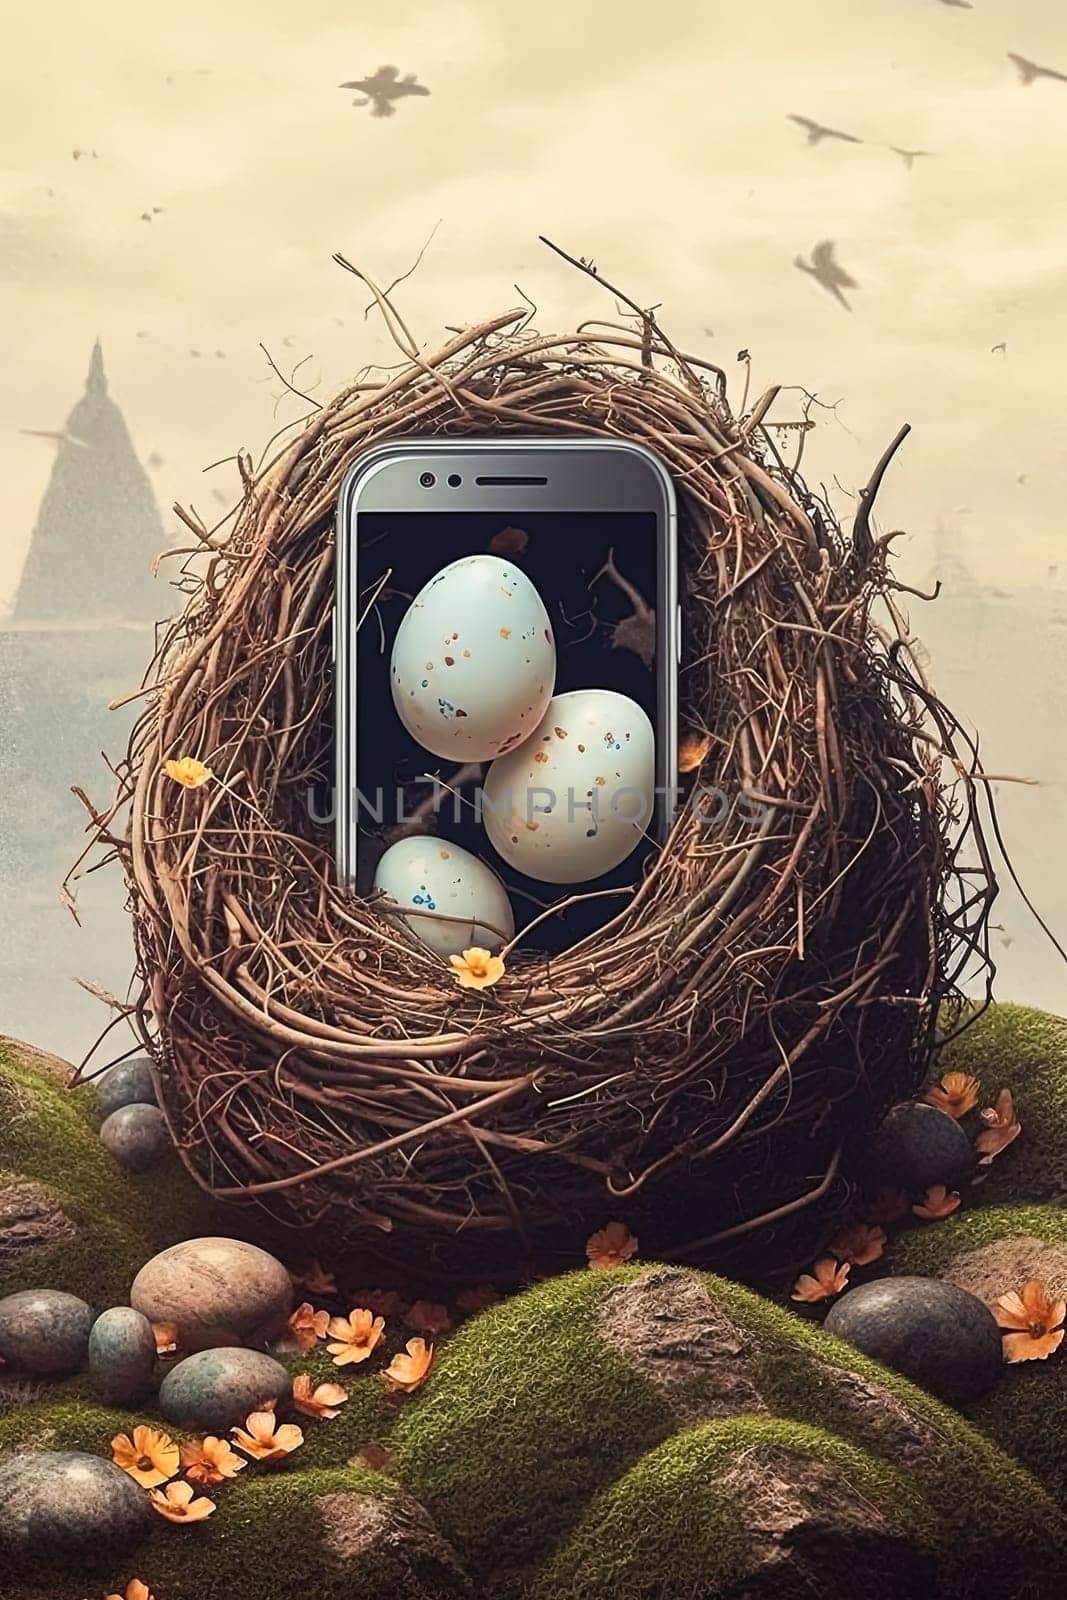 A small egg is sitting on a rock next to a cell phone by Alla_Morozova93